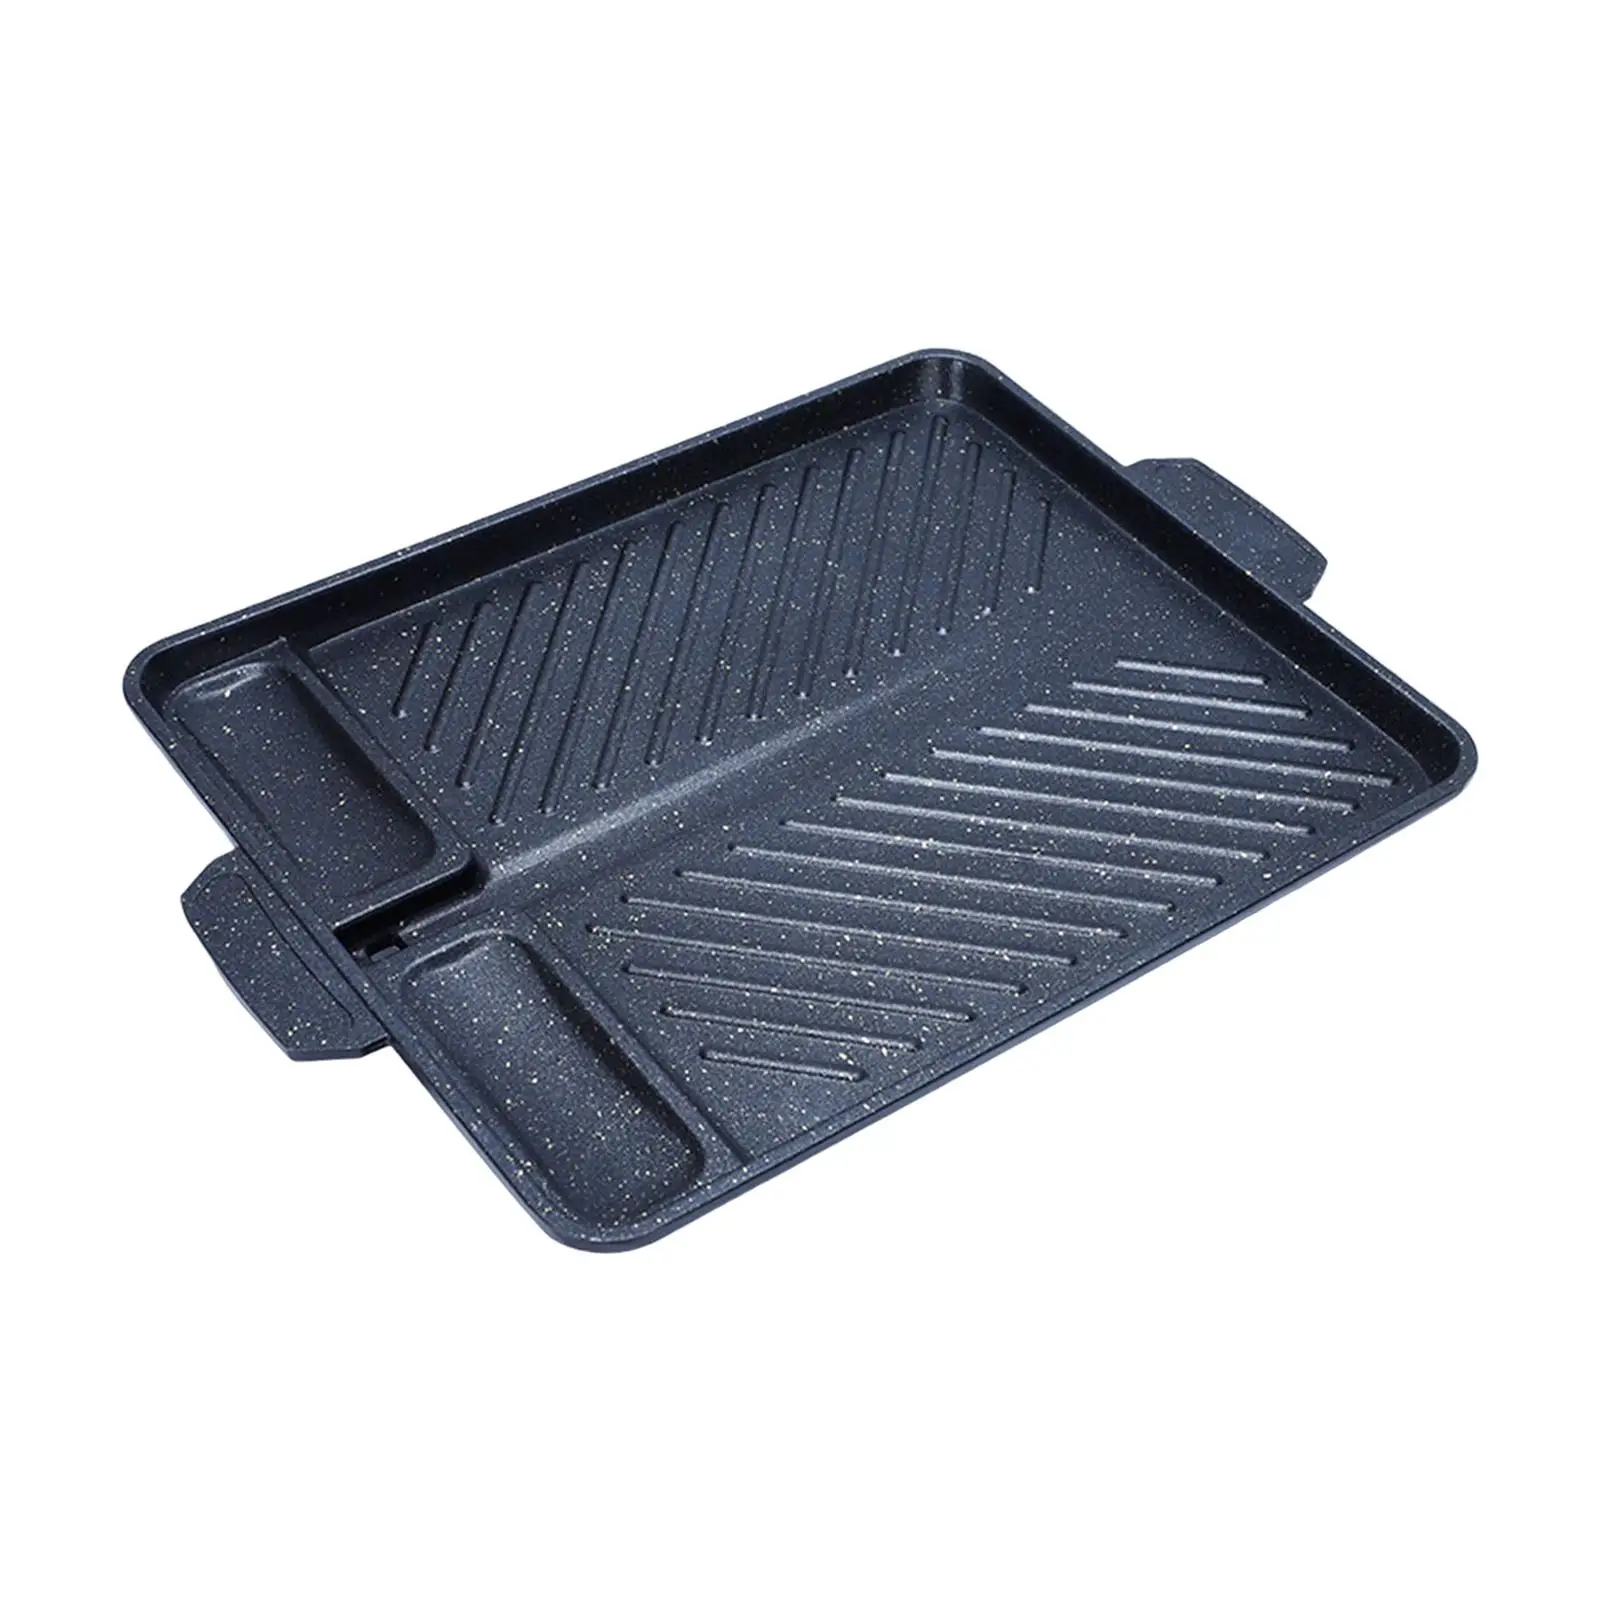 Korean Style Grilling Pan Griddle Grill Plate Multipurpose for Restaurant